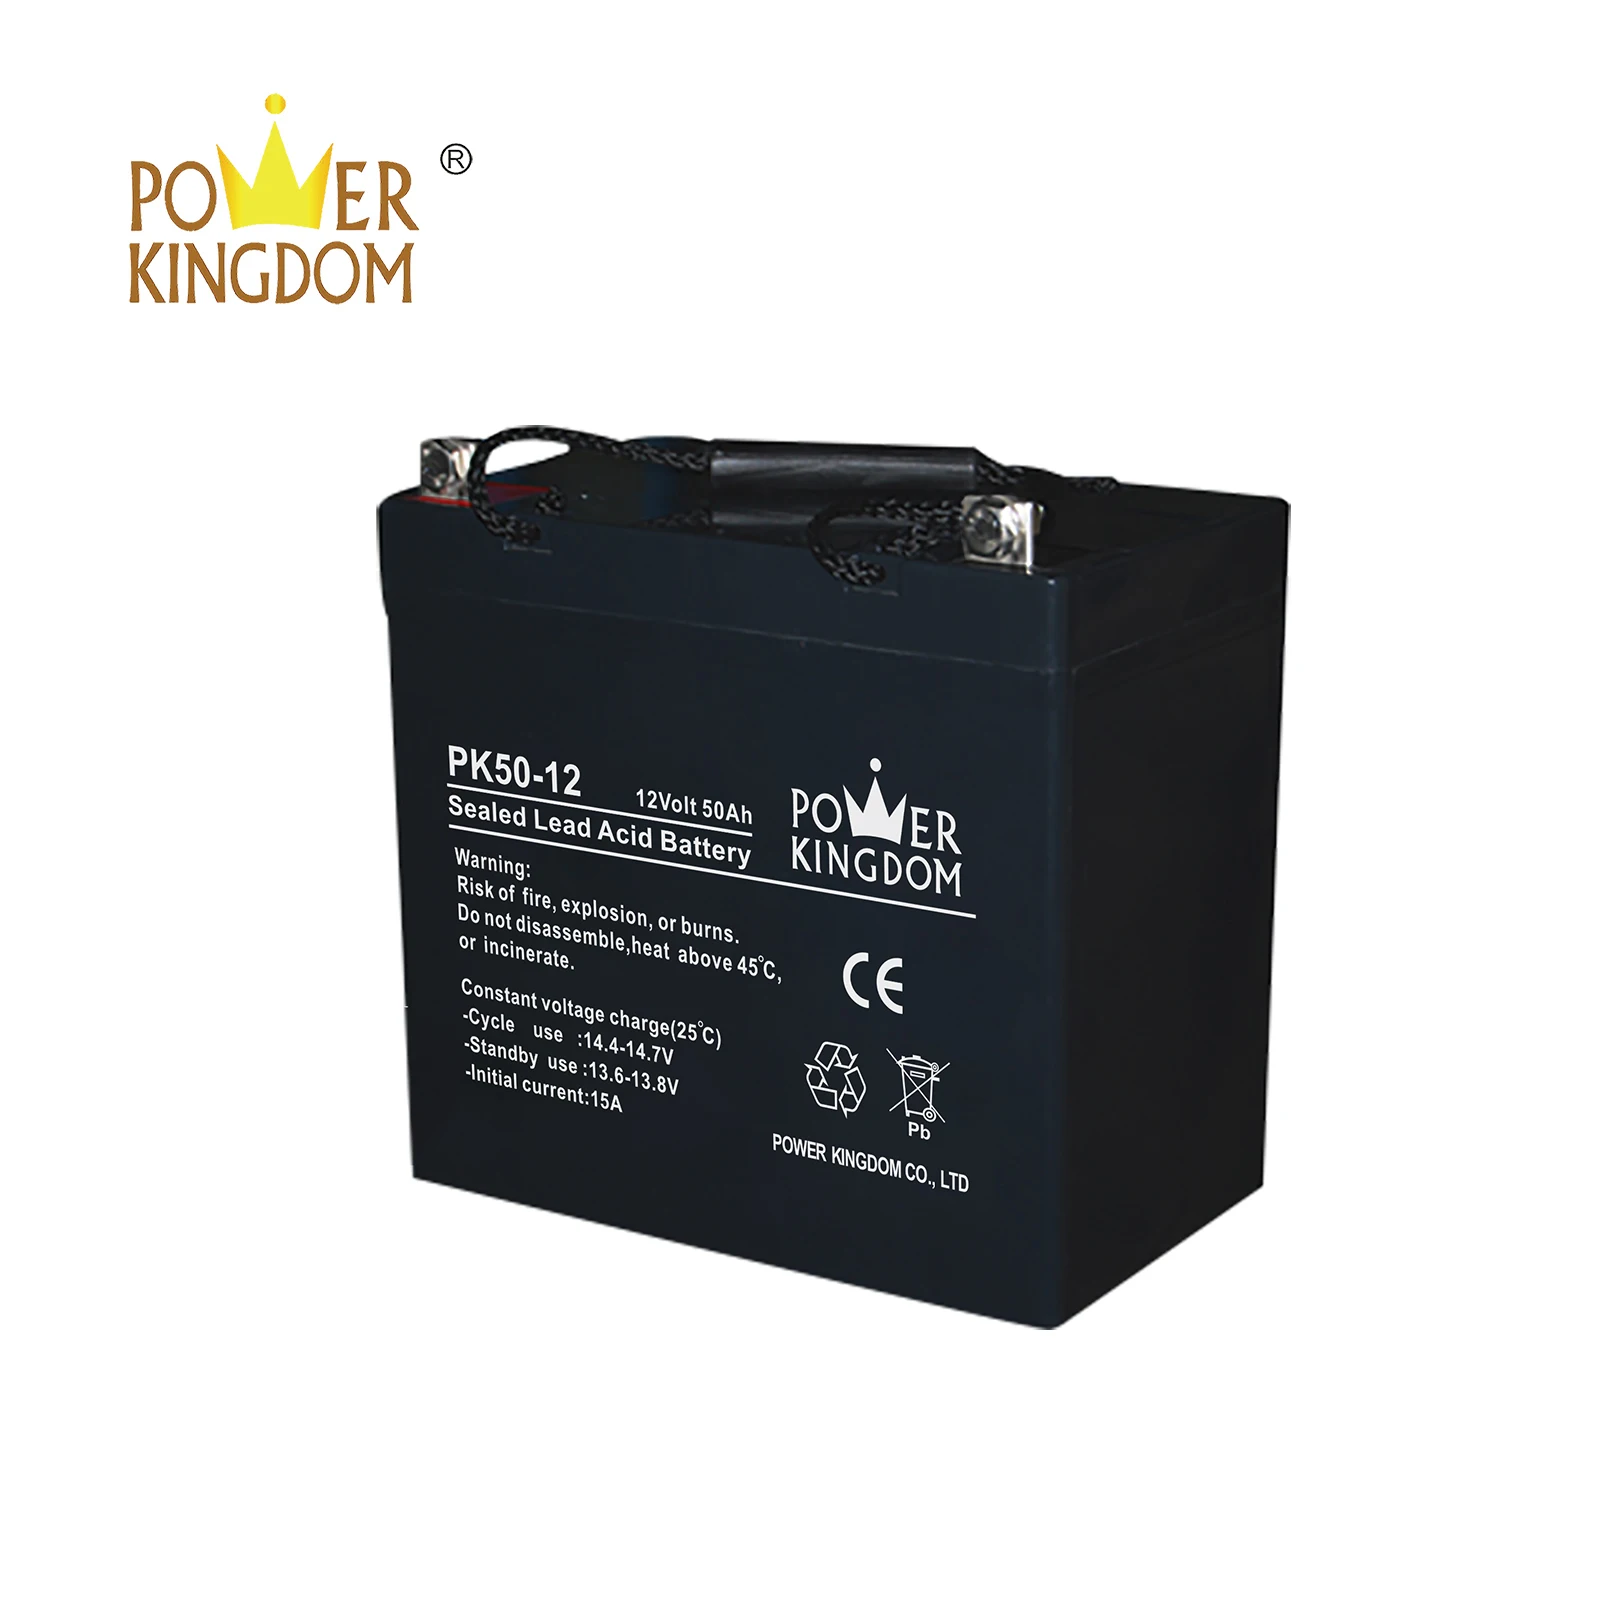 Power Kingdom charging gel cell deep cycle batteries Supply solar and wind power system